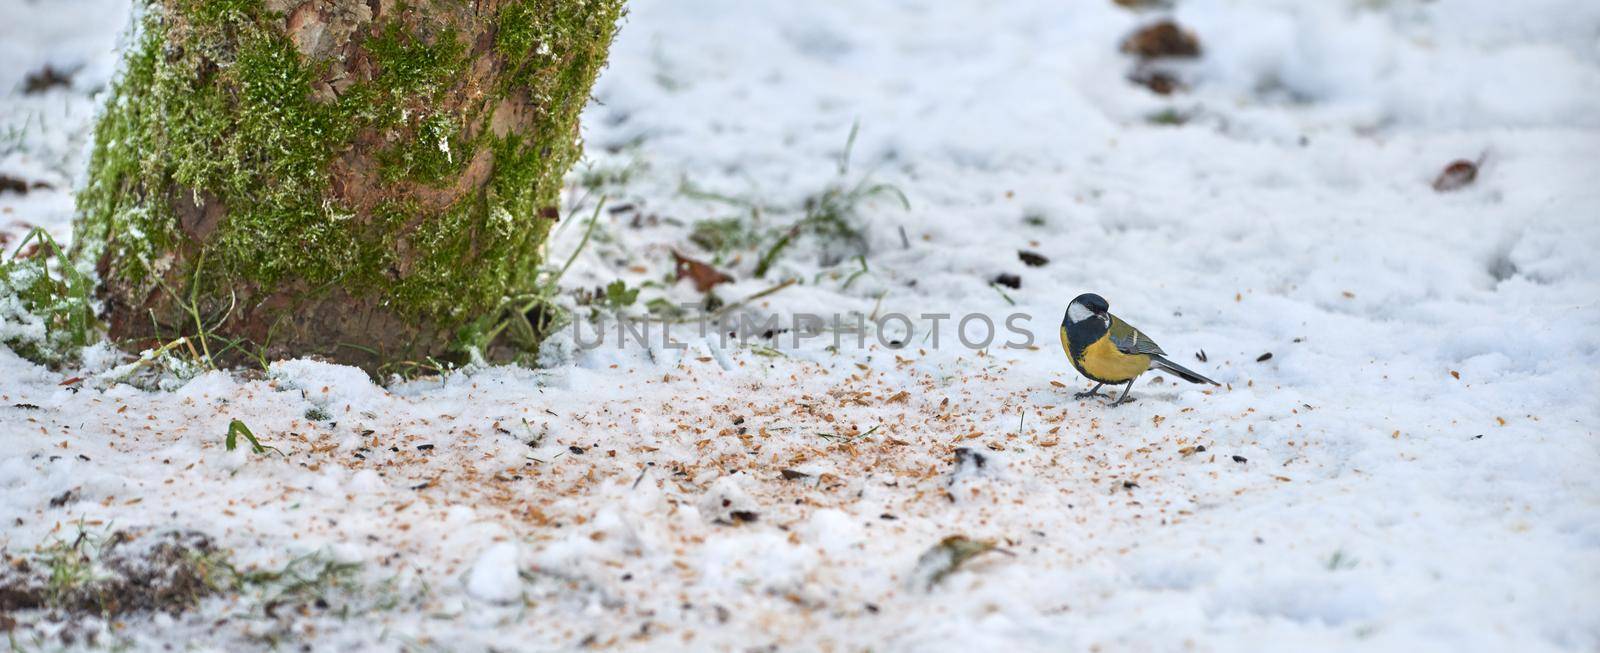 Supporting and feeding bird life during the winter season as part of nature conservation and protection. Eurasian blue tit standing outside on the snow during an icy and cold morning after snow fall by YuriArcurs